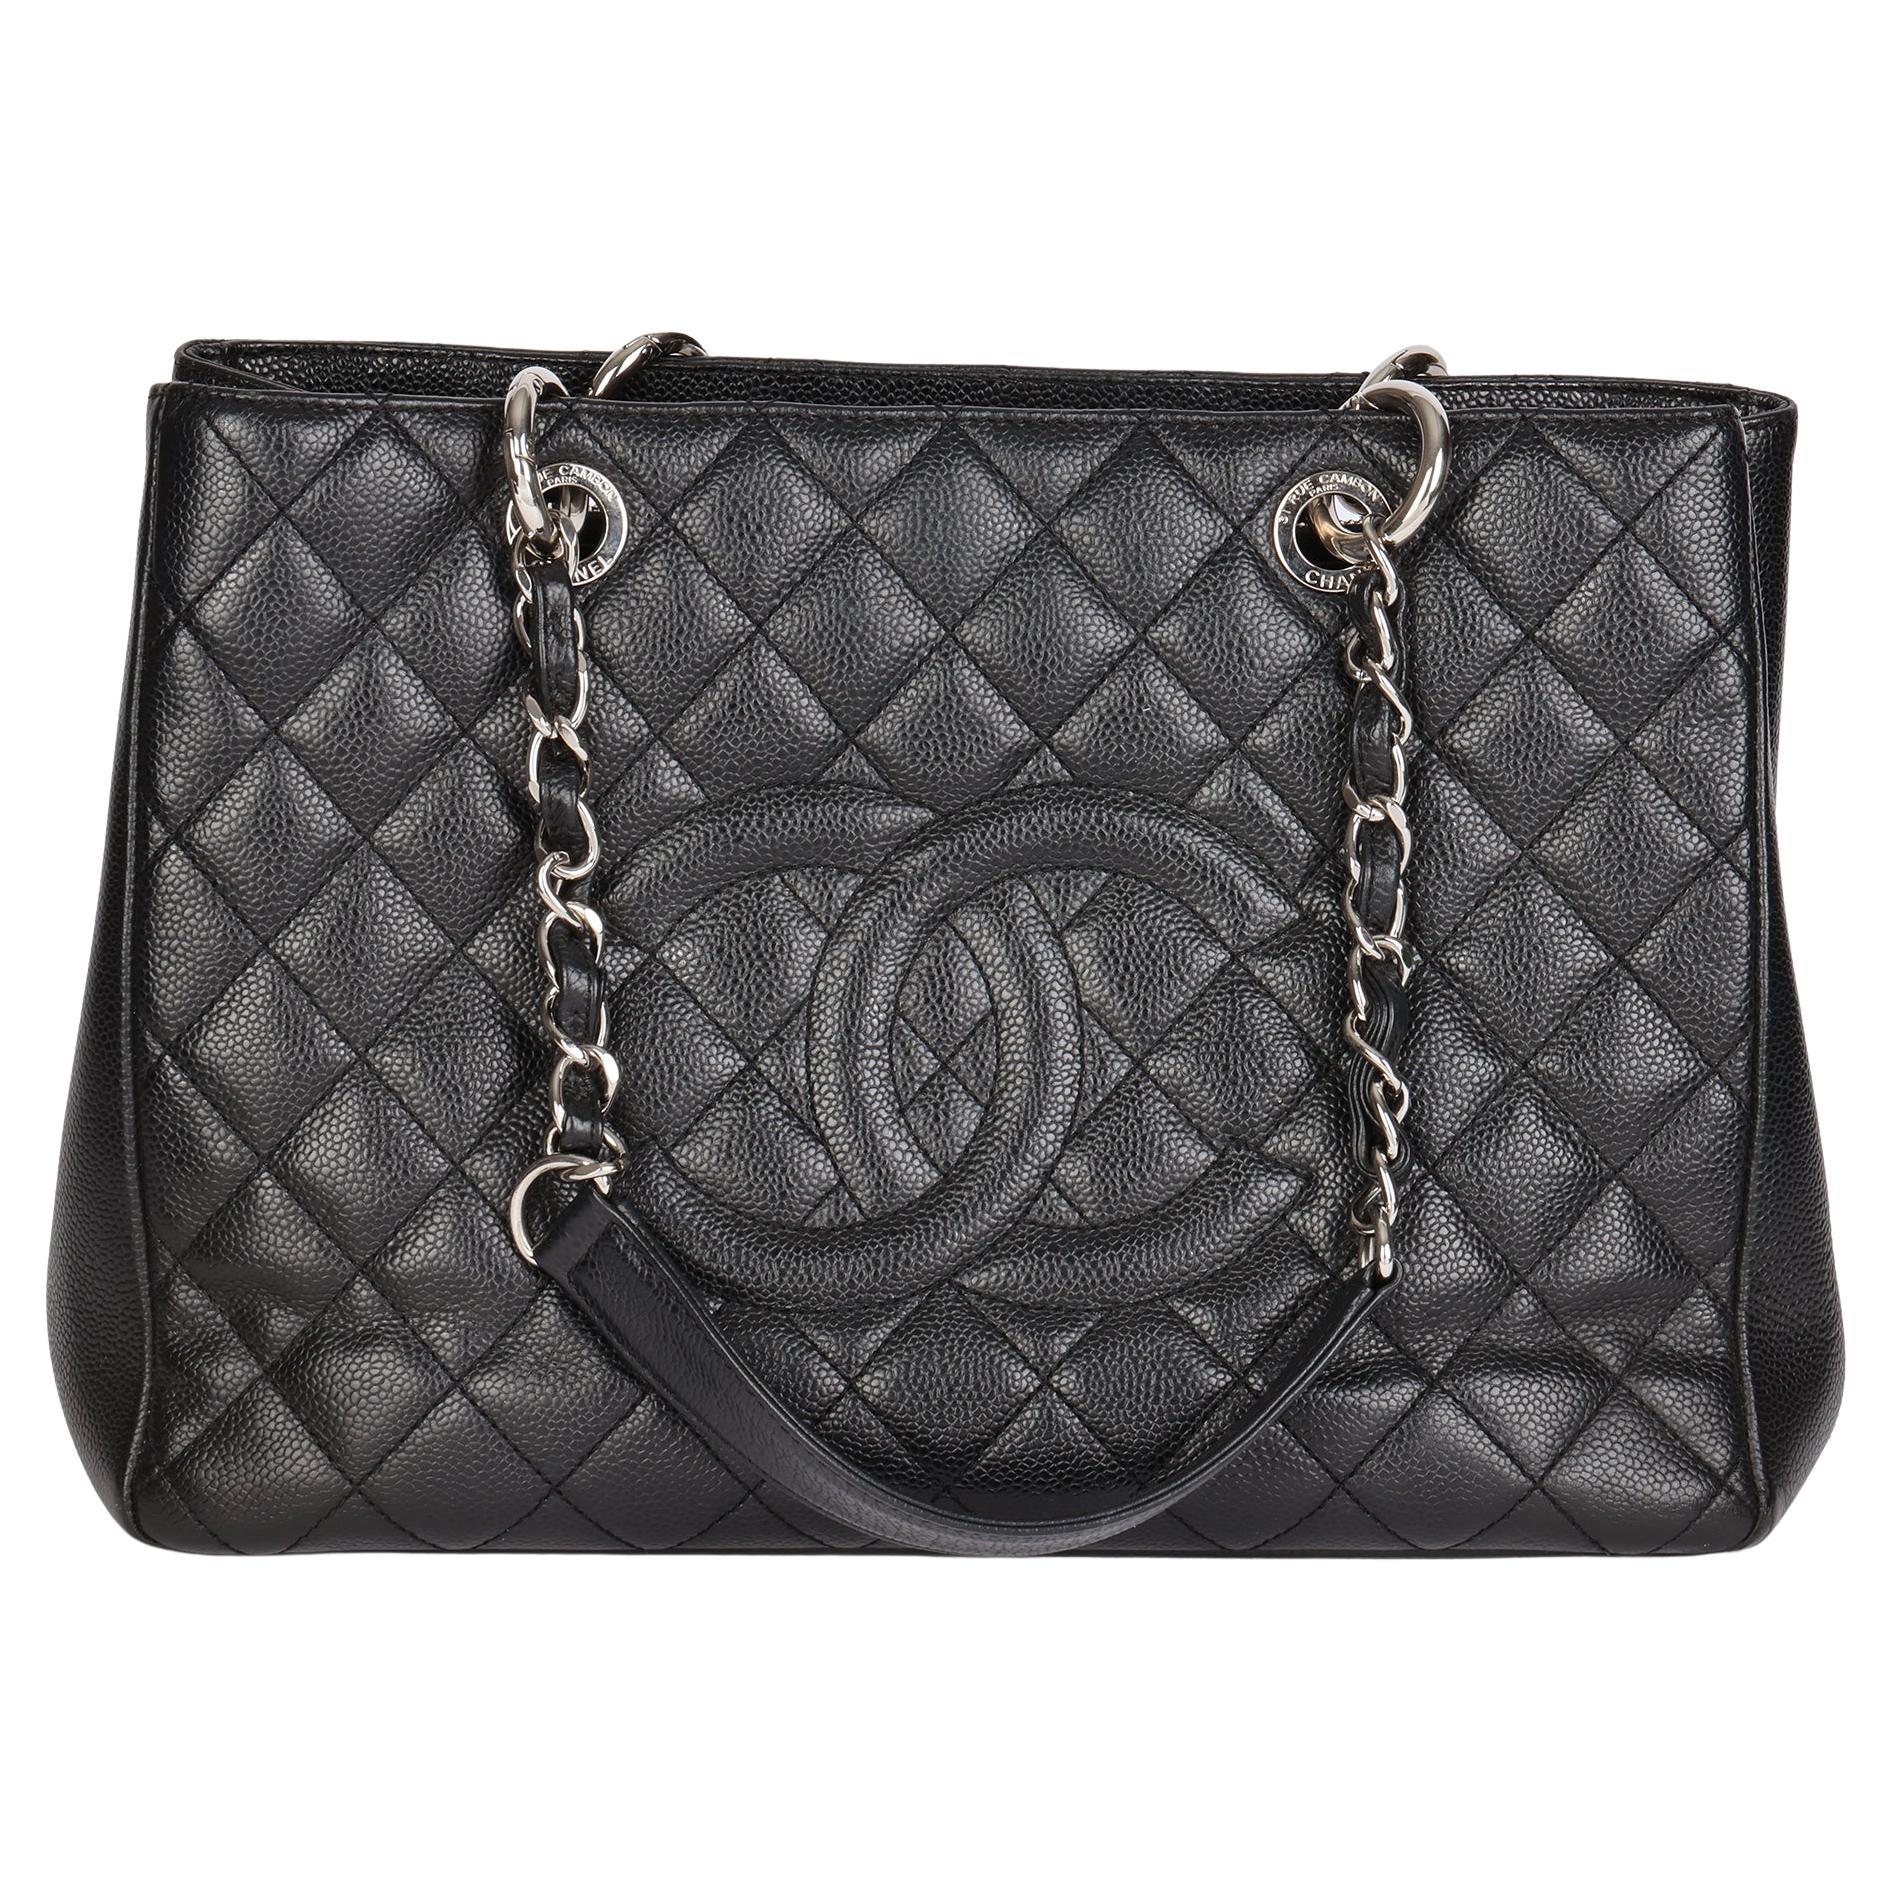 Chanel BLACK QUILTED CAVIAR LEATHER GRAND SHOPPING